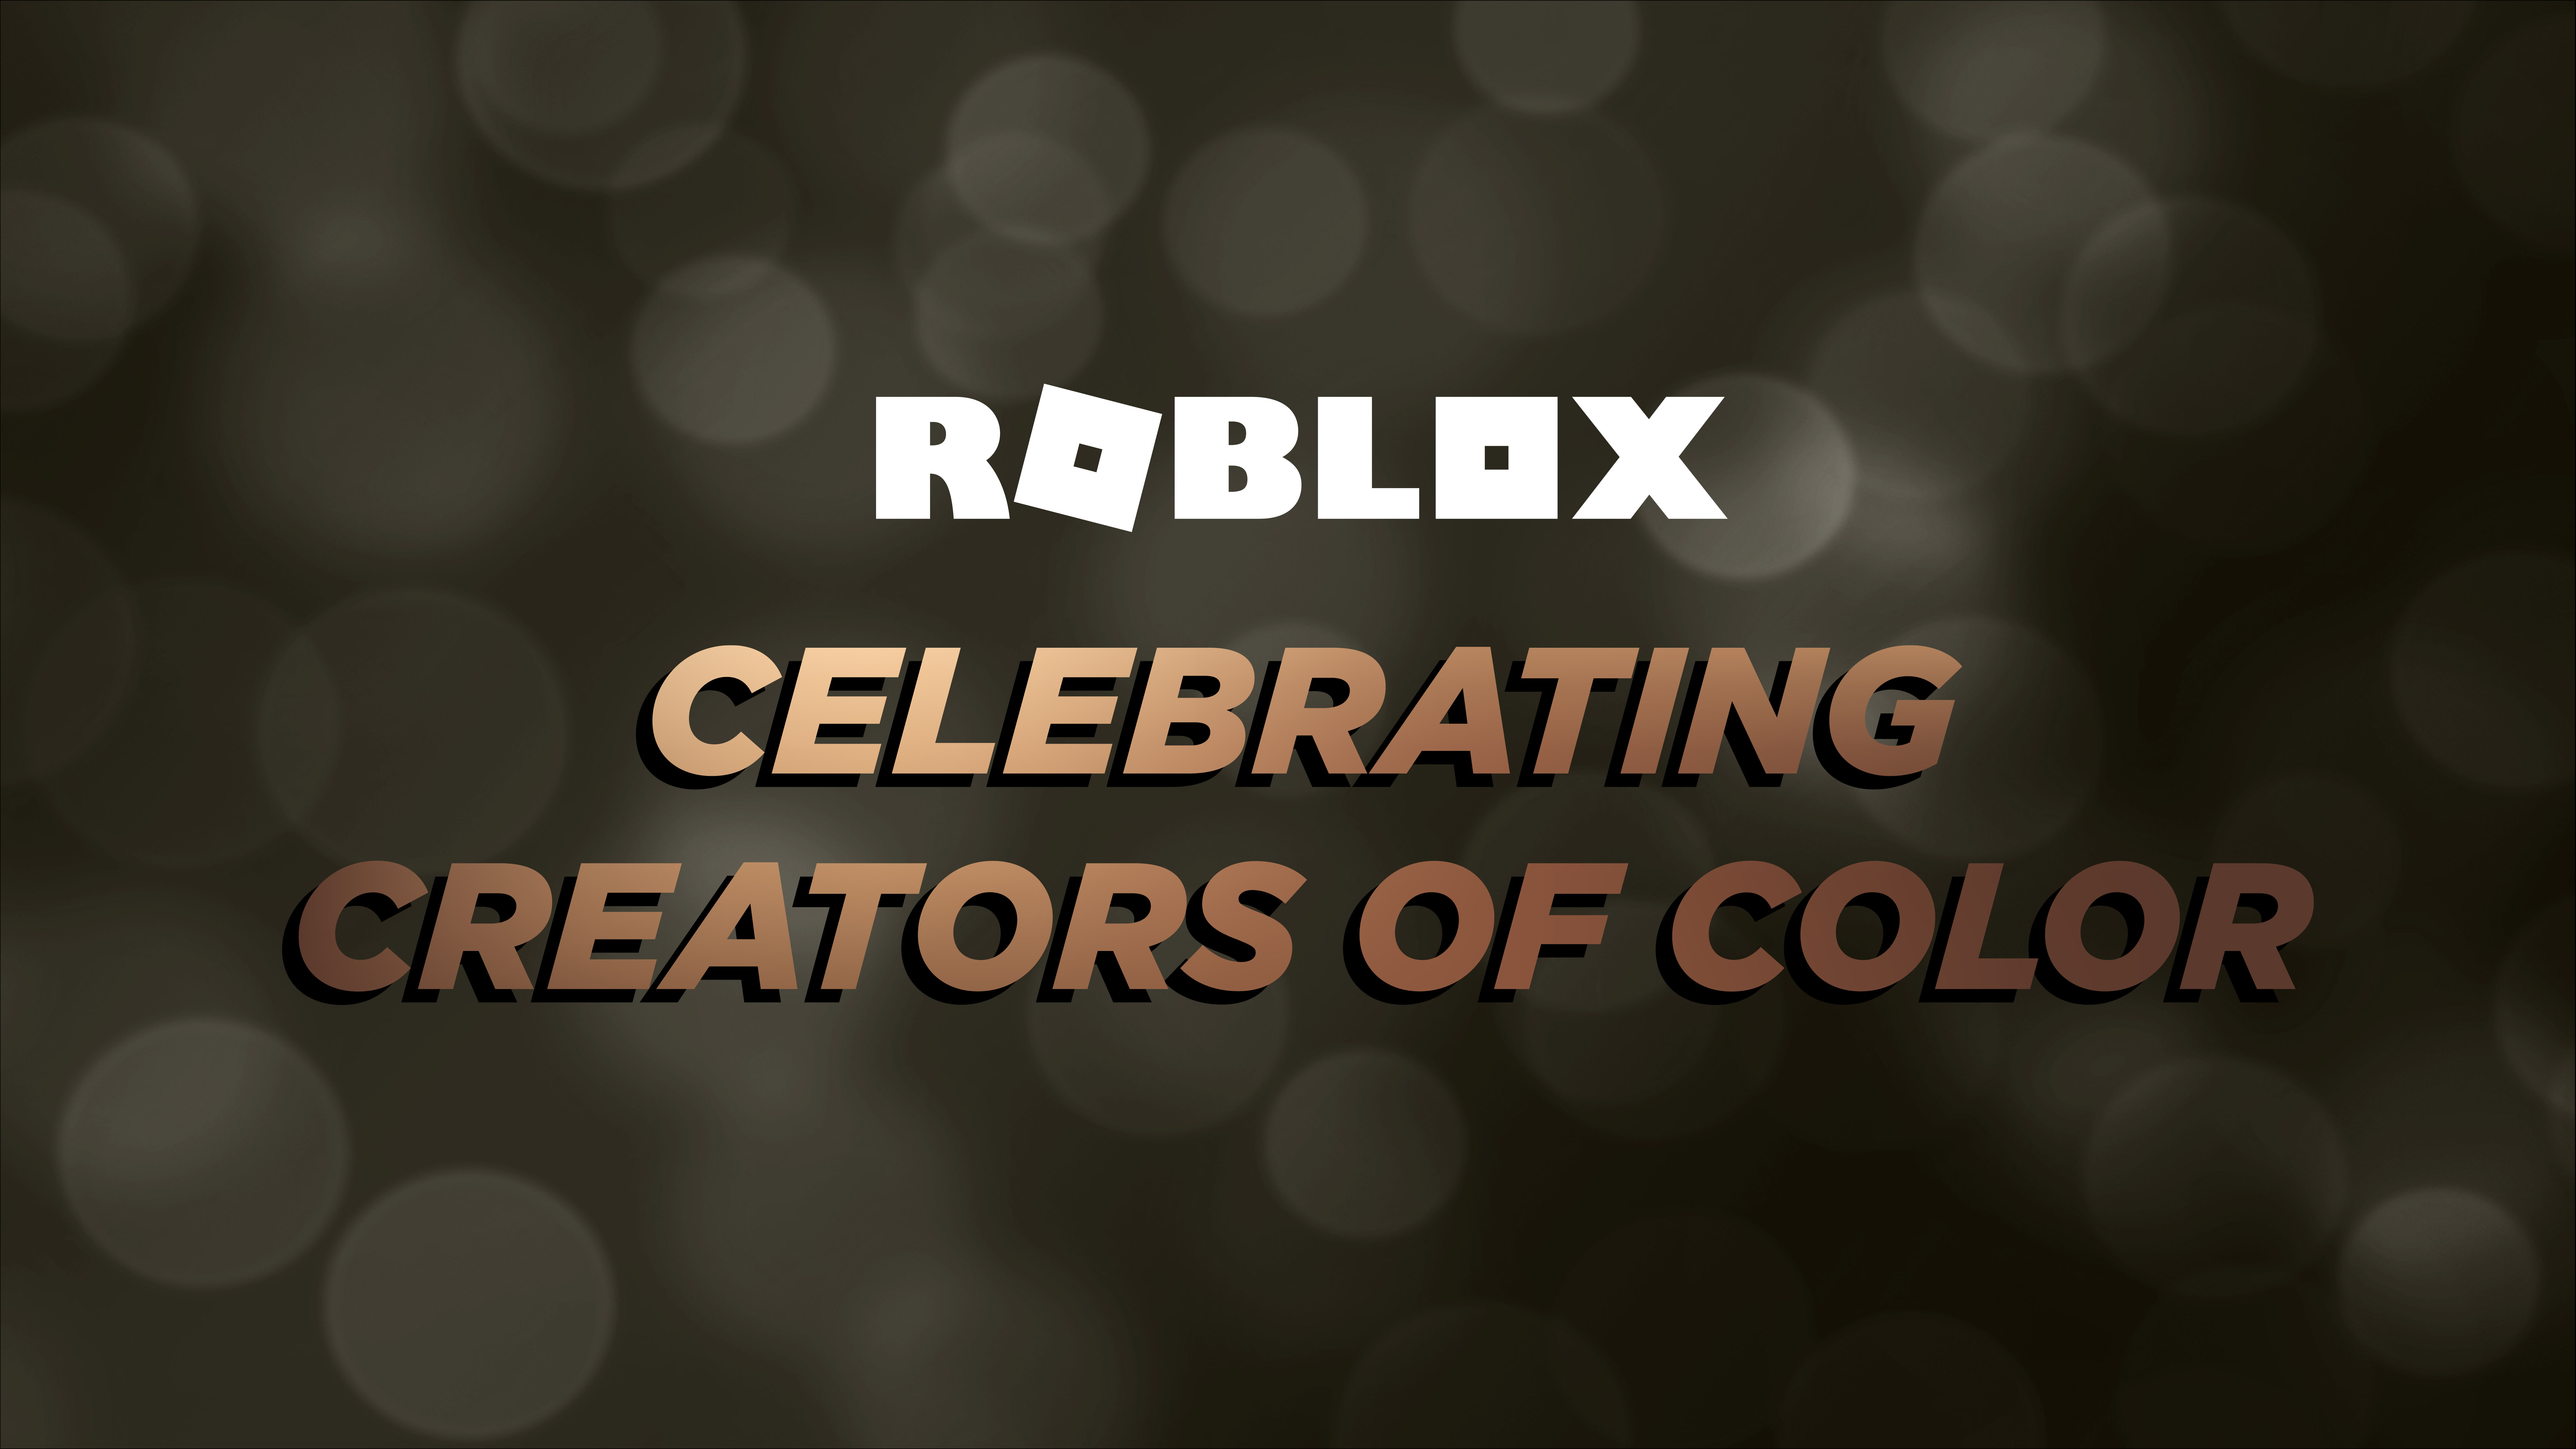 Roblox Blog All The Latest News Direct From Roblox Employees - roblox creator died 2020